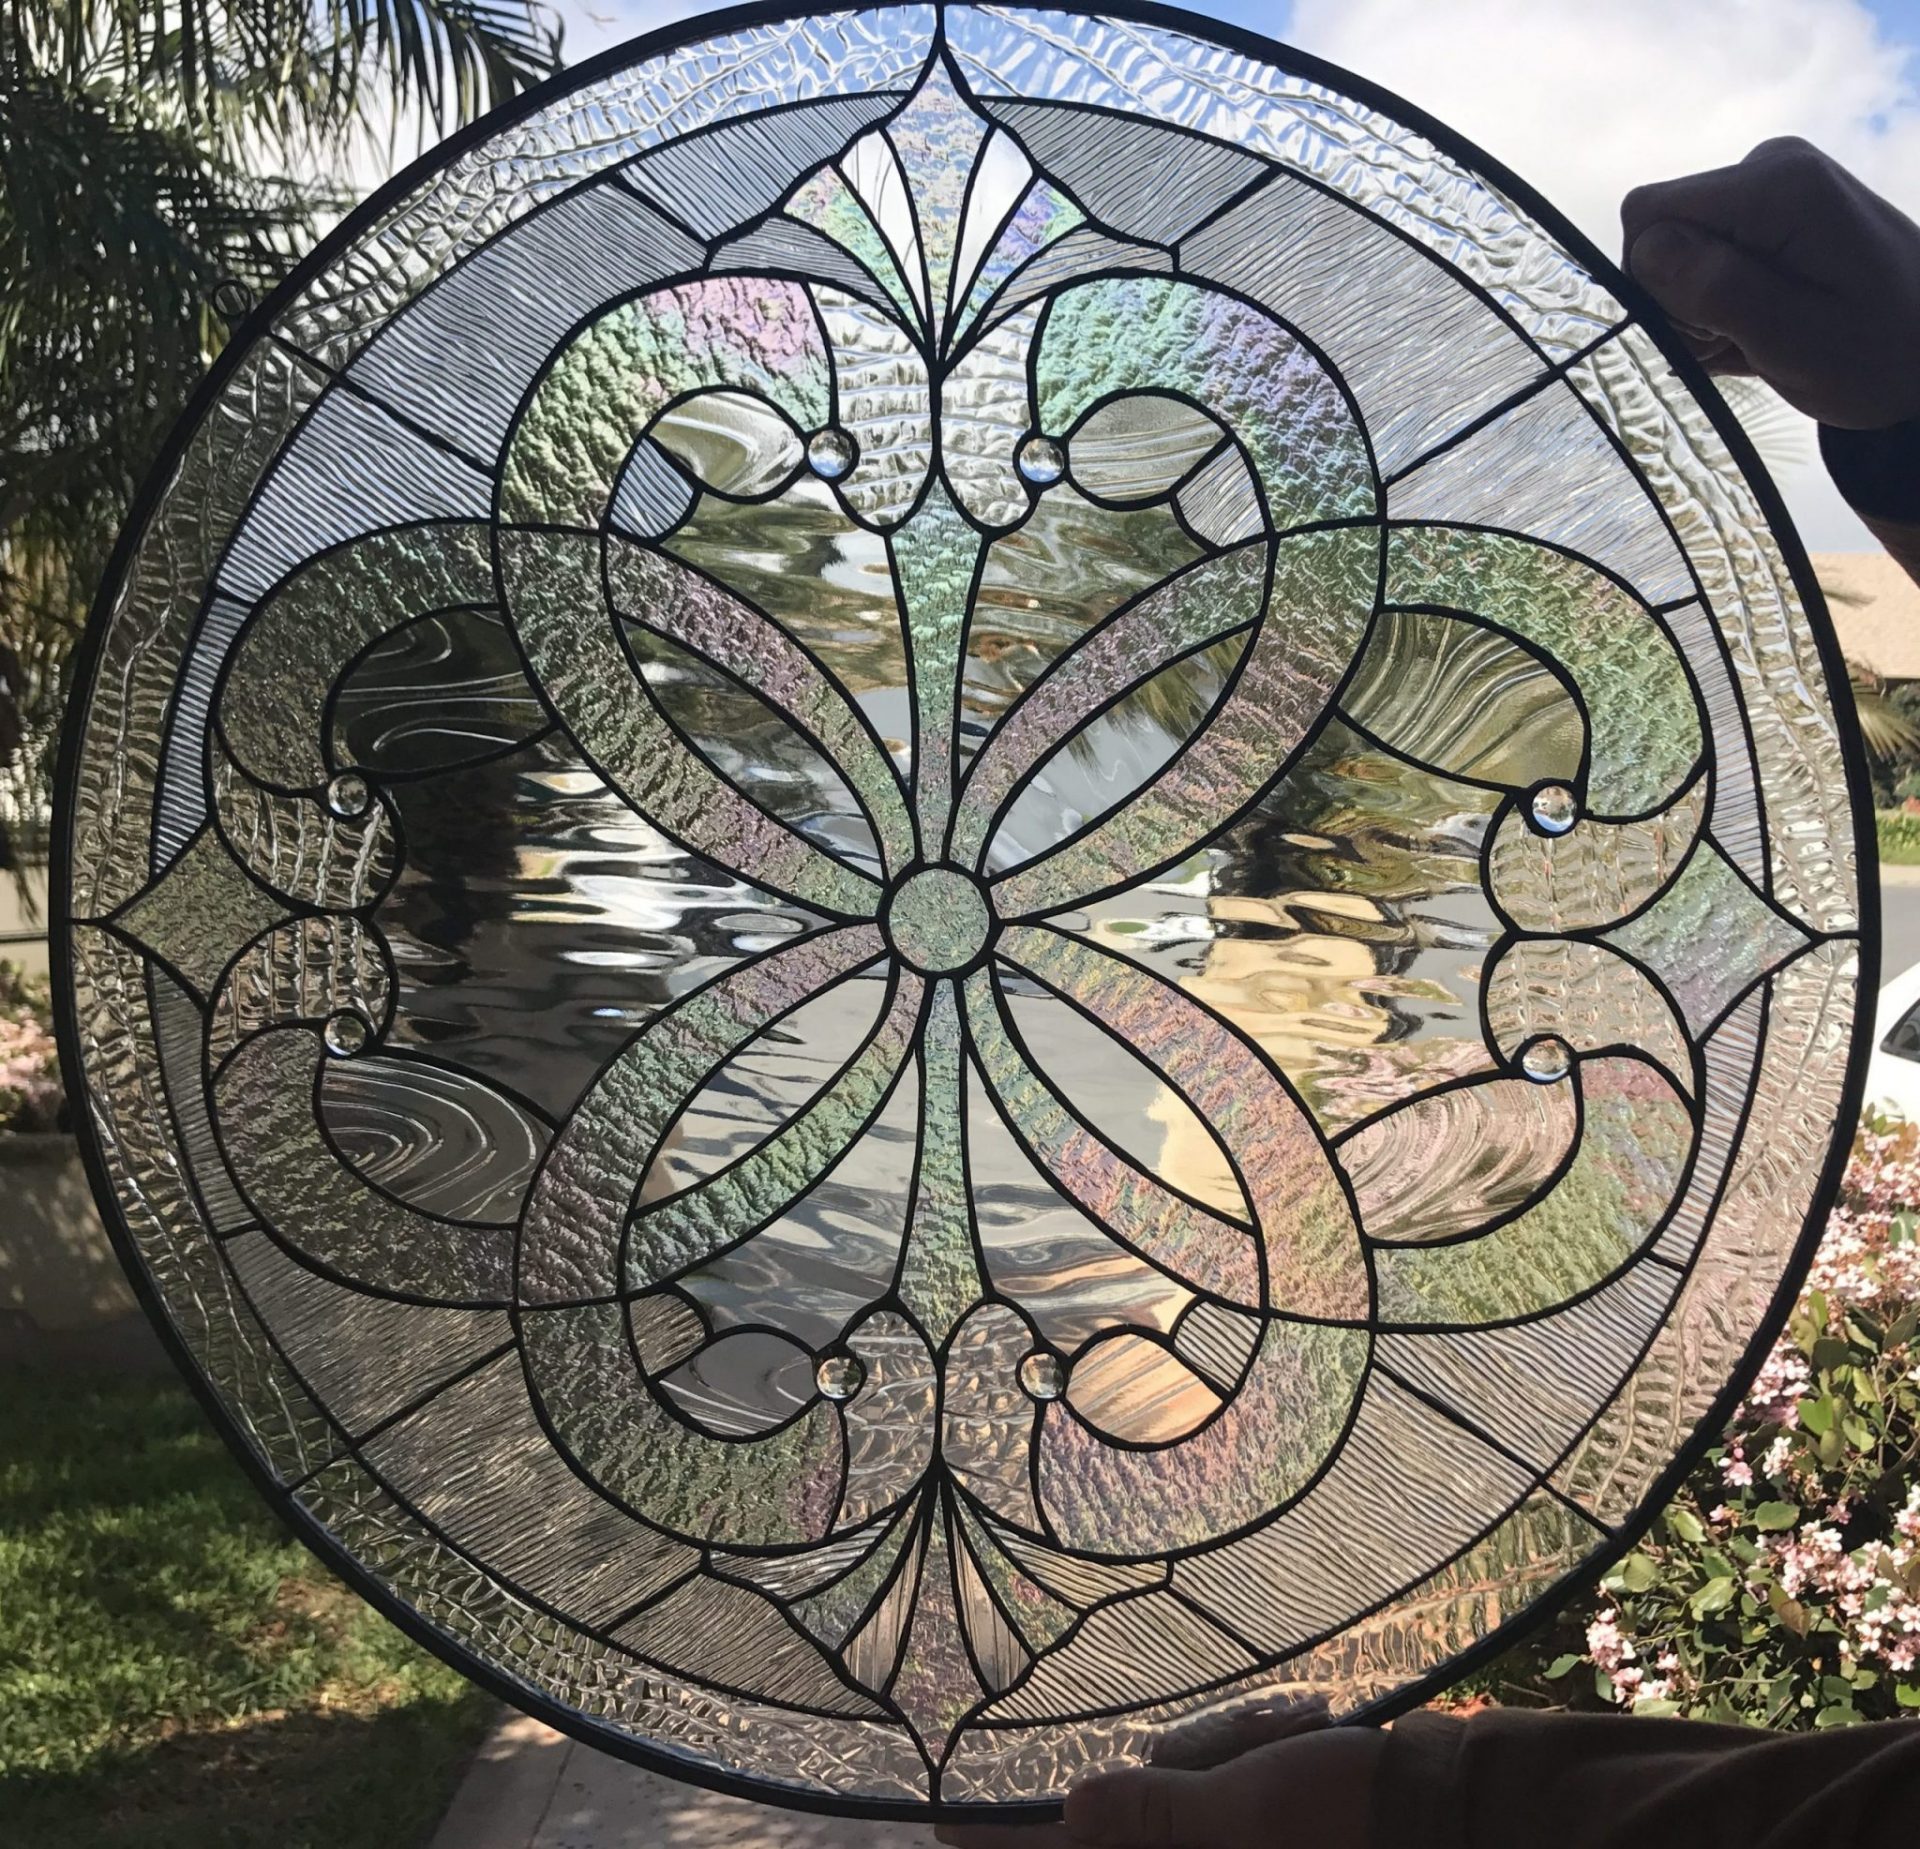 The Stunning Round Windsor Leaded Stained Glass Window Panel